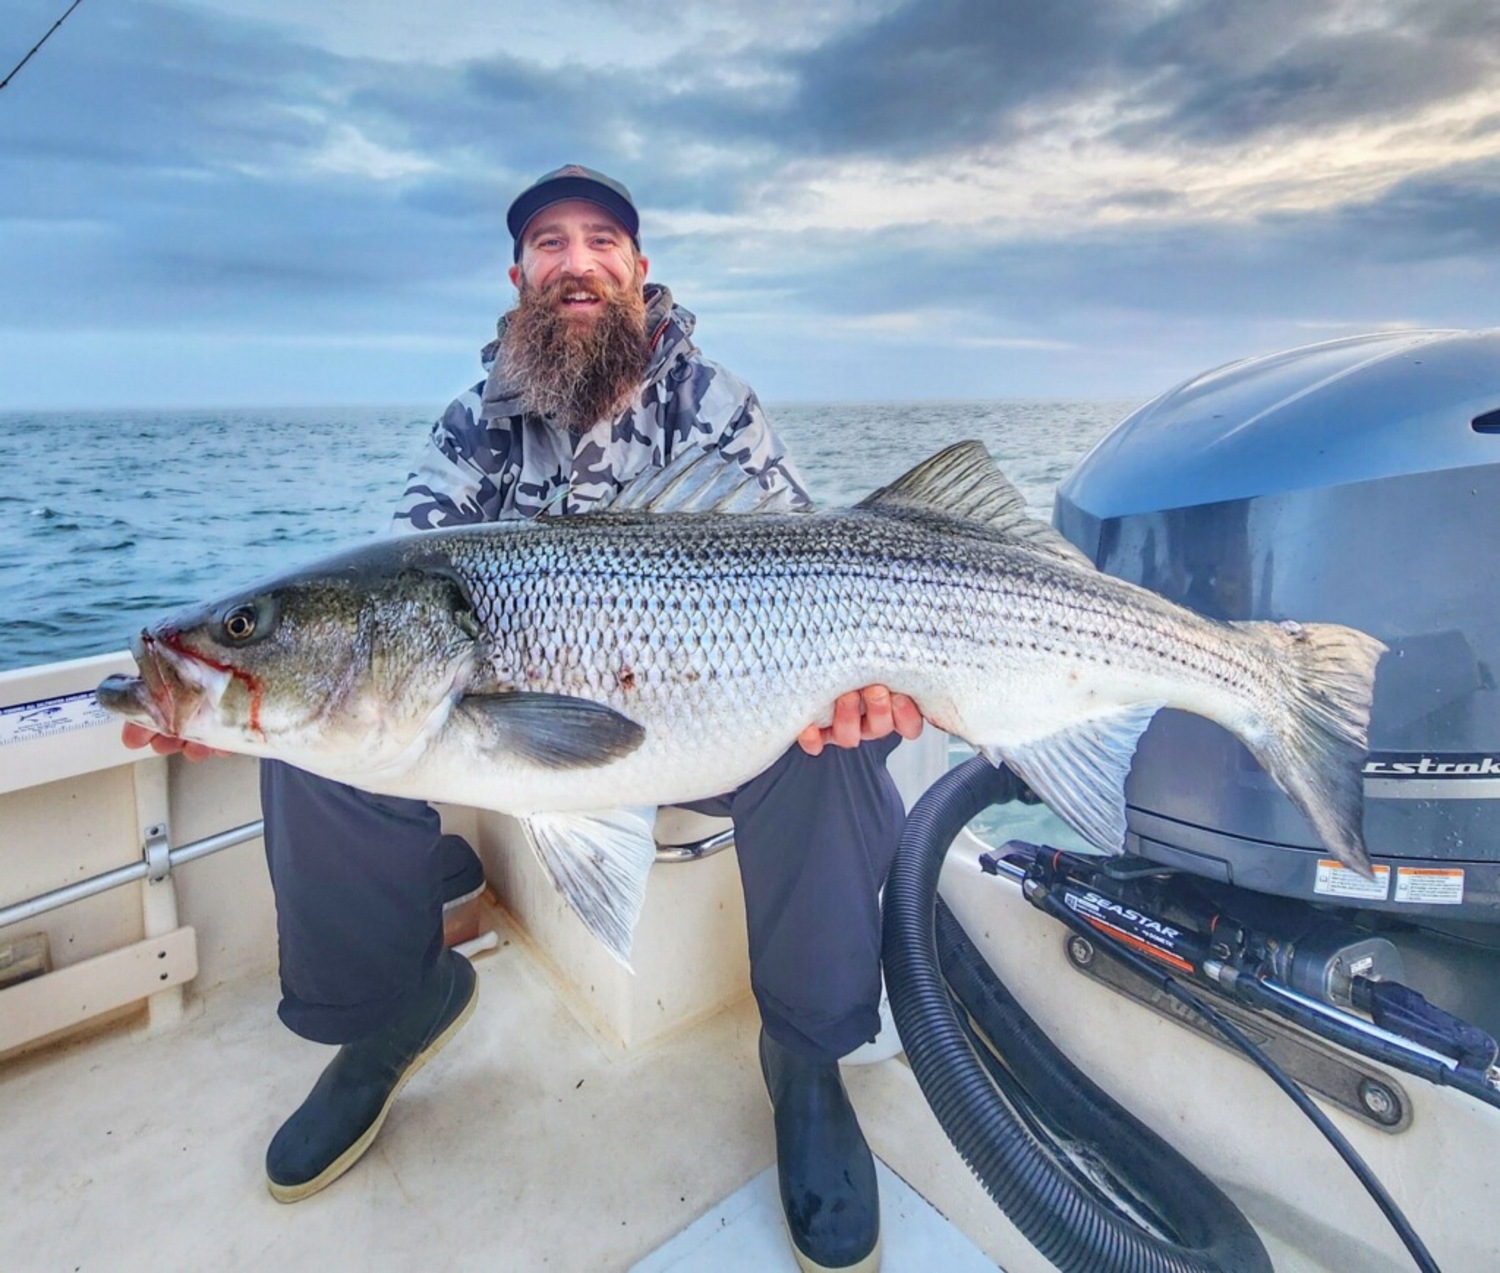 Big striped bass have settled into the waters off Montauk. Jon Russo caught this nice one while fishing with Capt. Savio Mizzi of Fishooker Charters last weekend. 
CAPT SAVIO MIZZI